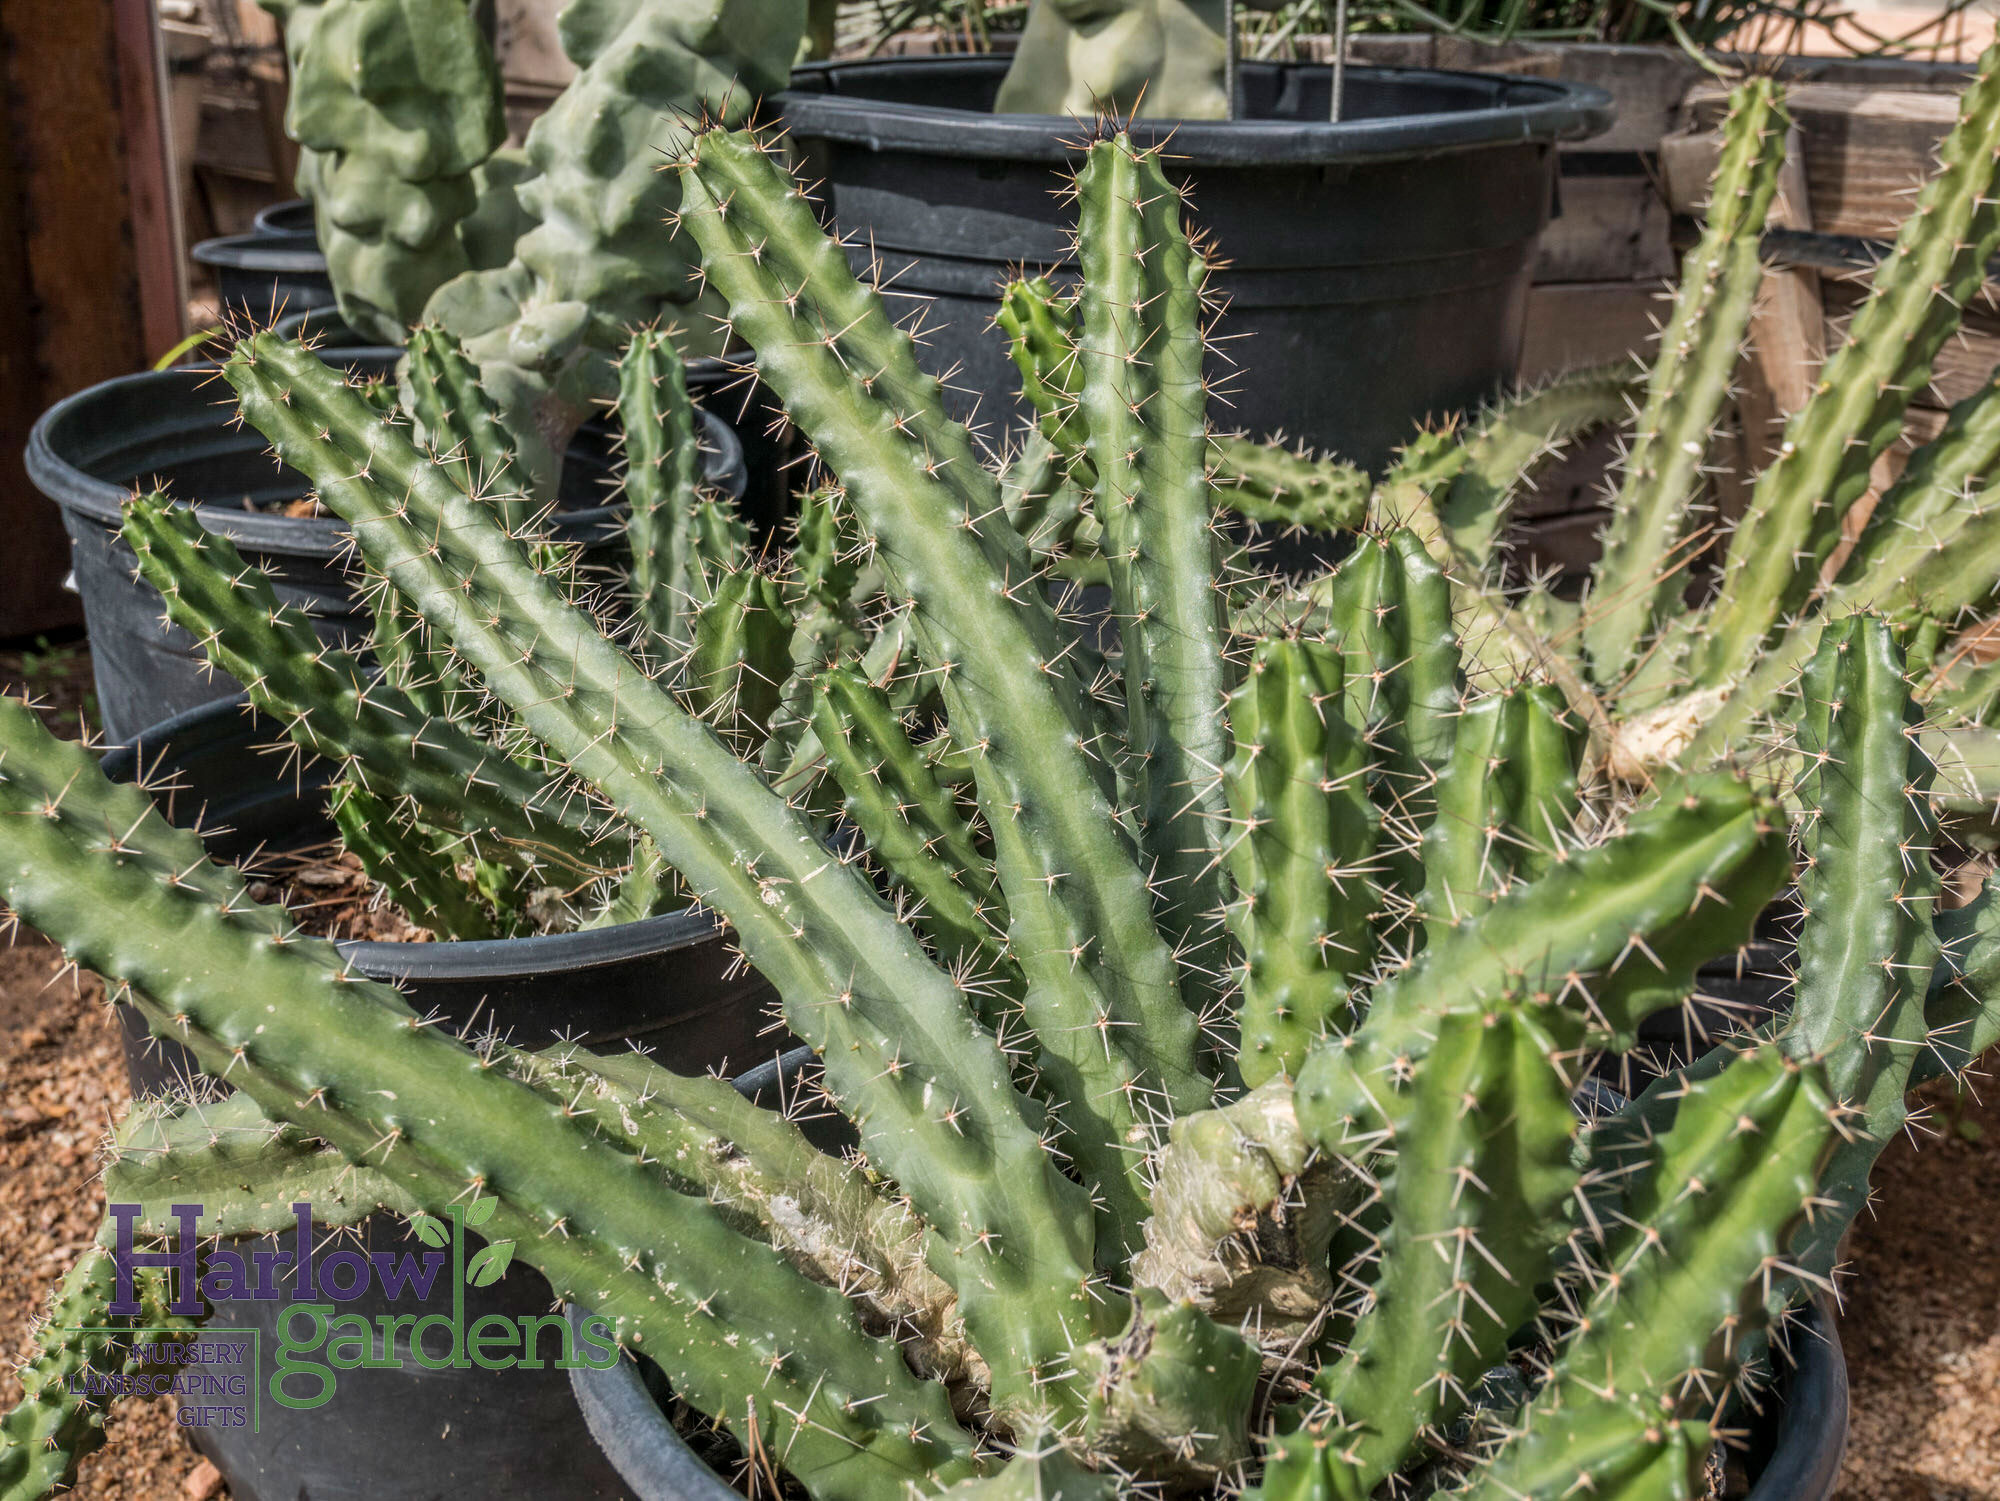 Lady Finger Cactus for sale at Harlow Gardens Tucson.